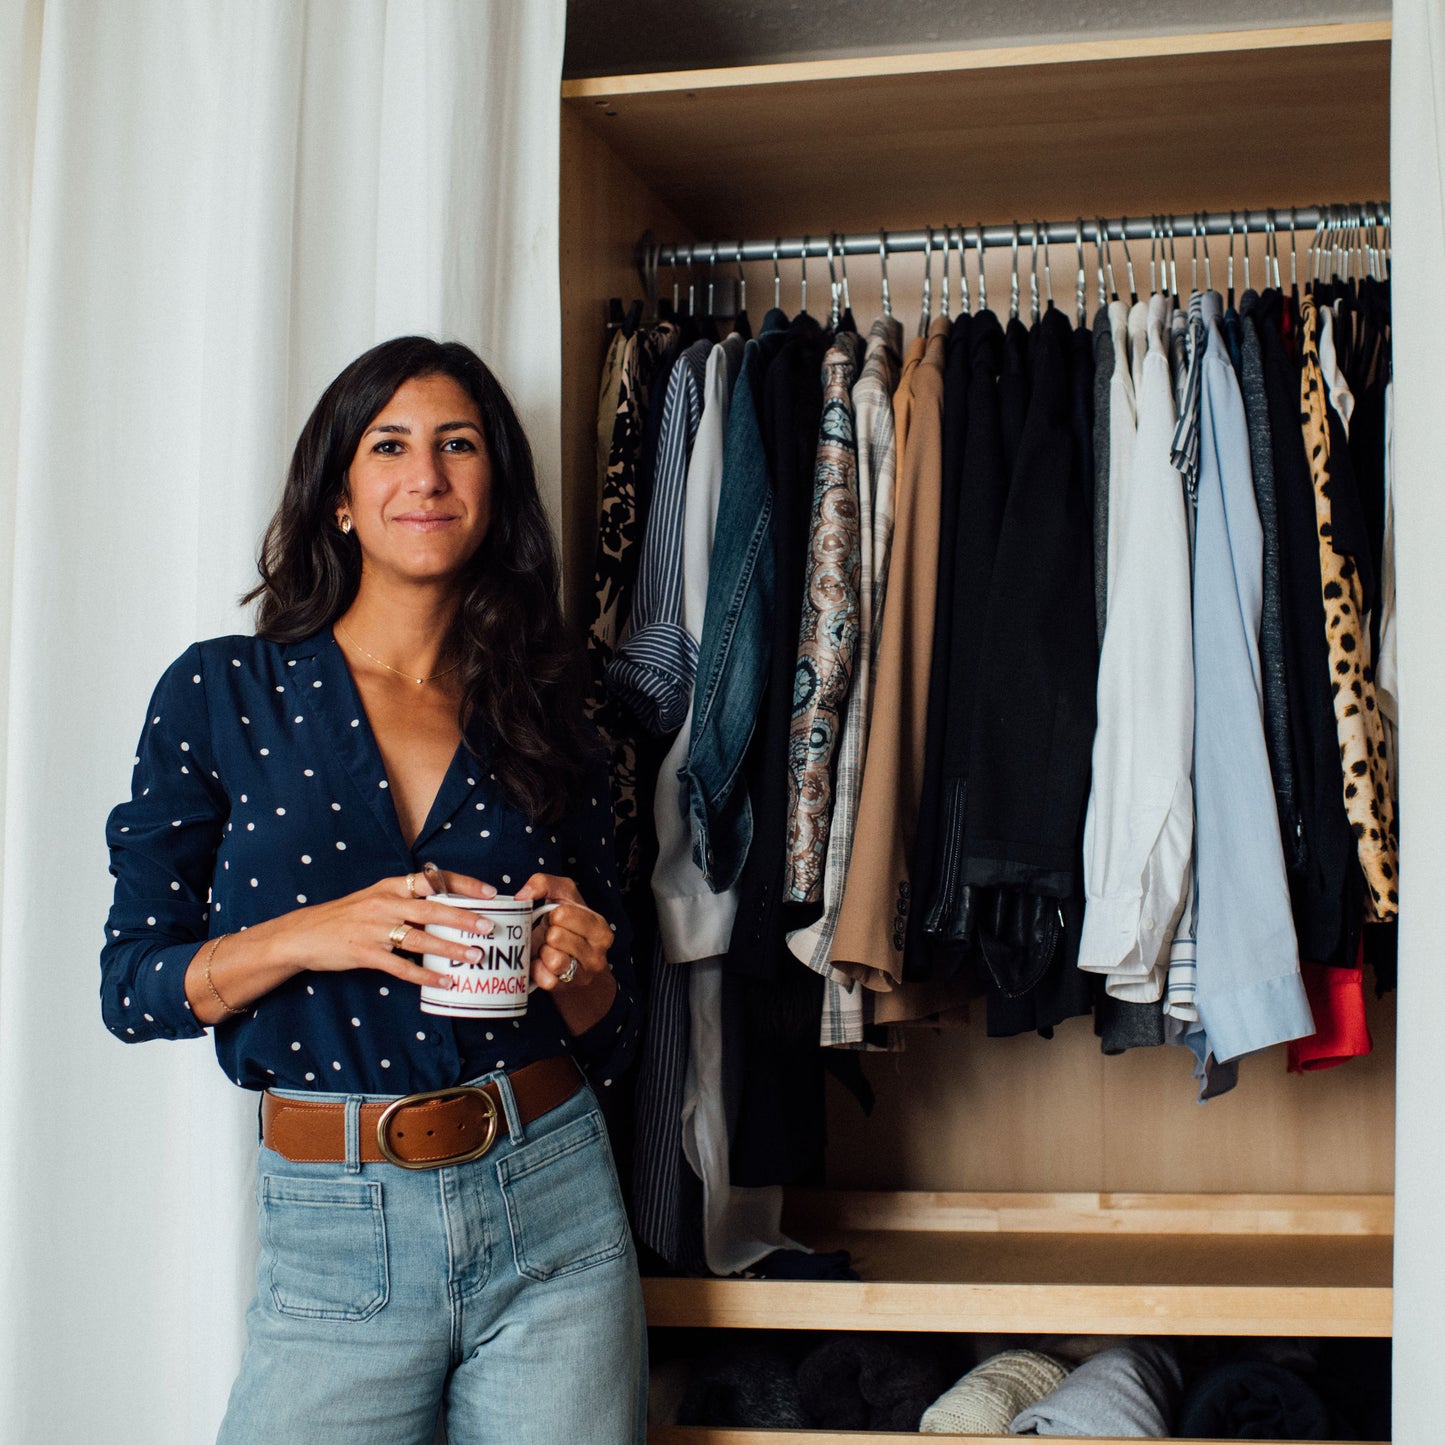 alyssa beltempo is a slow fashion stylist who offers virtual "shop your closet" sessions. She is standing holding coffee next to a neatly arranged closet full of beautiful clothes